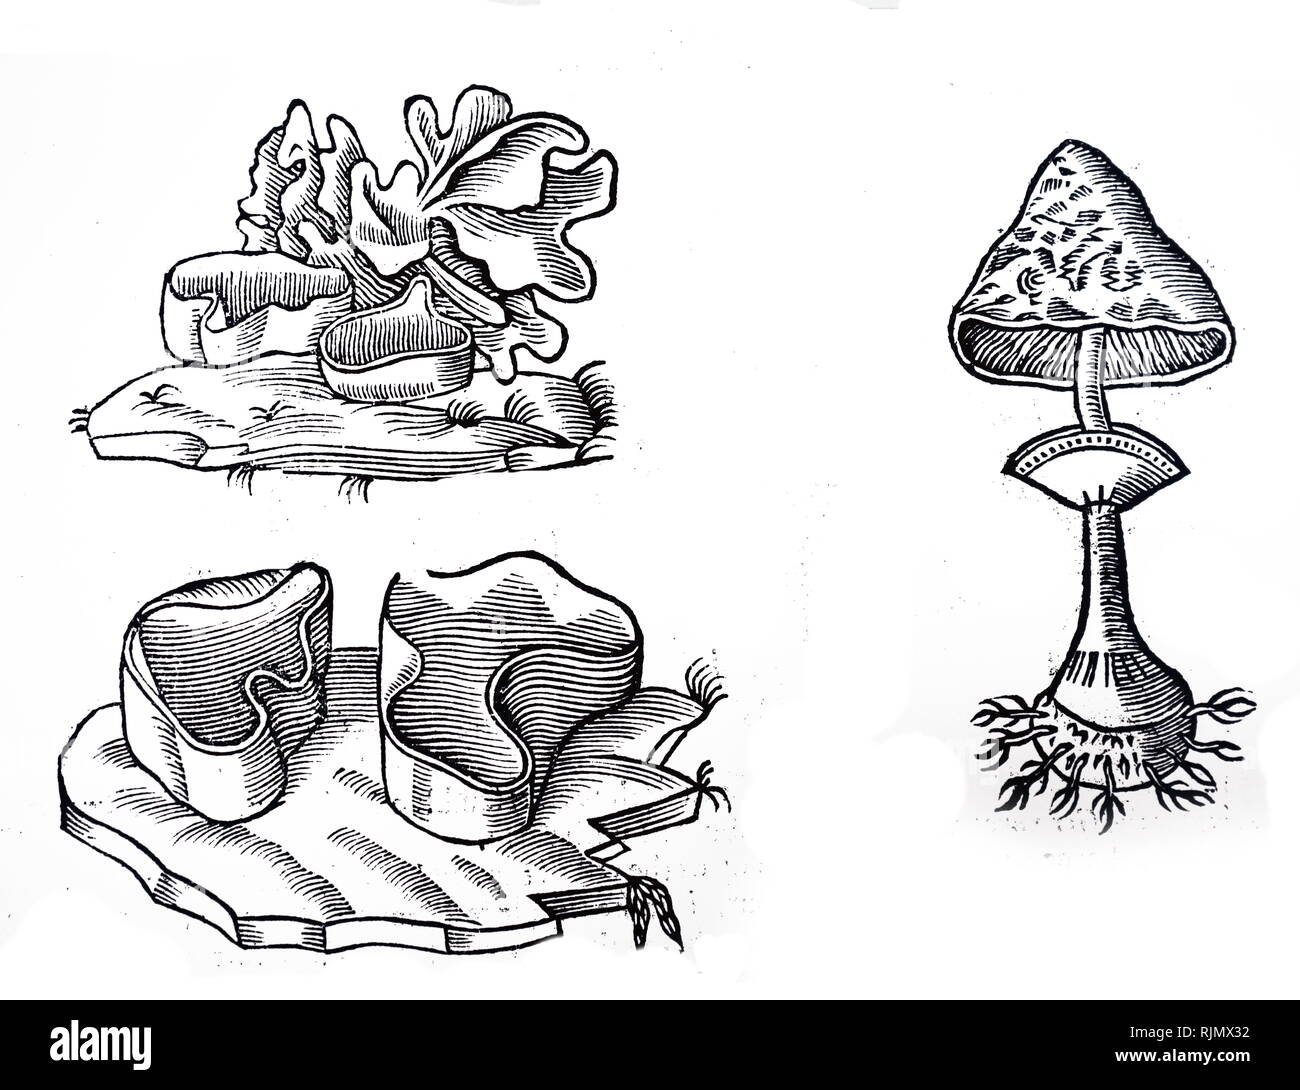 An engraving depicting a selection of Peziza; a large genus of saprophytic cup fungi that grow on the ground, rotting wood, or dung. From: John Parkinson 'Theatrum Botanicum: The Theater of Planta', London 1640 Stock Photo